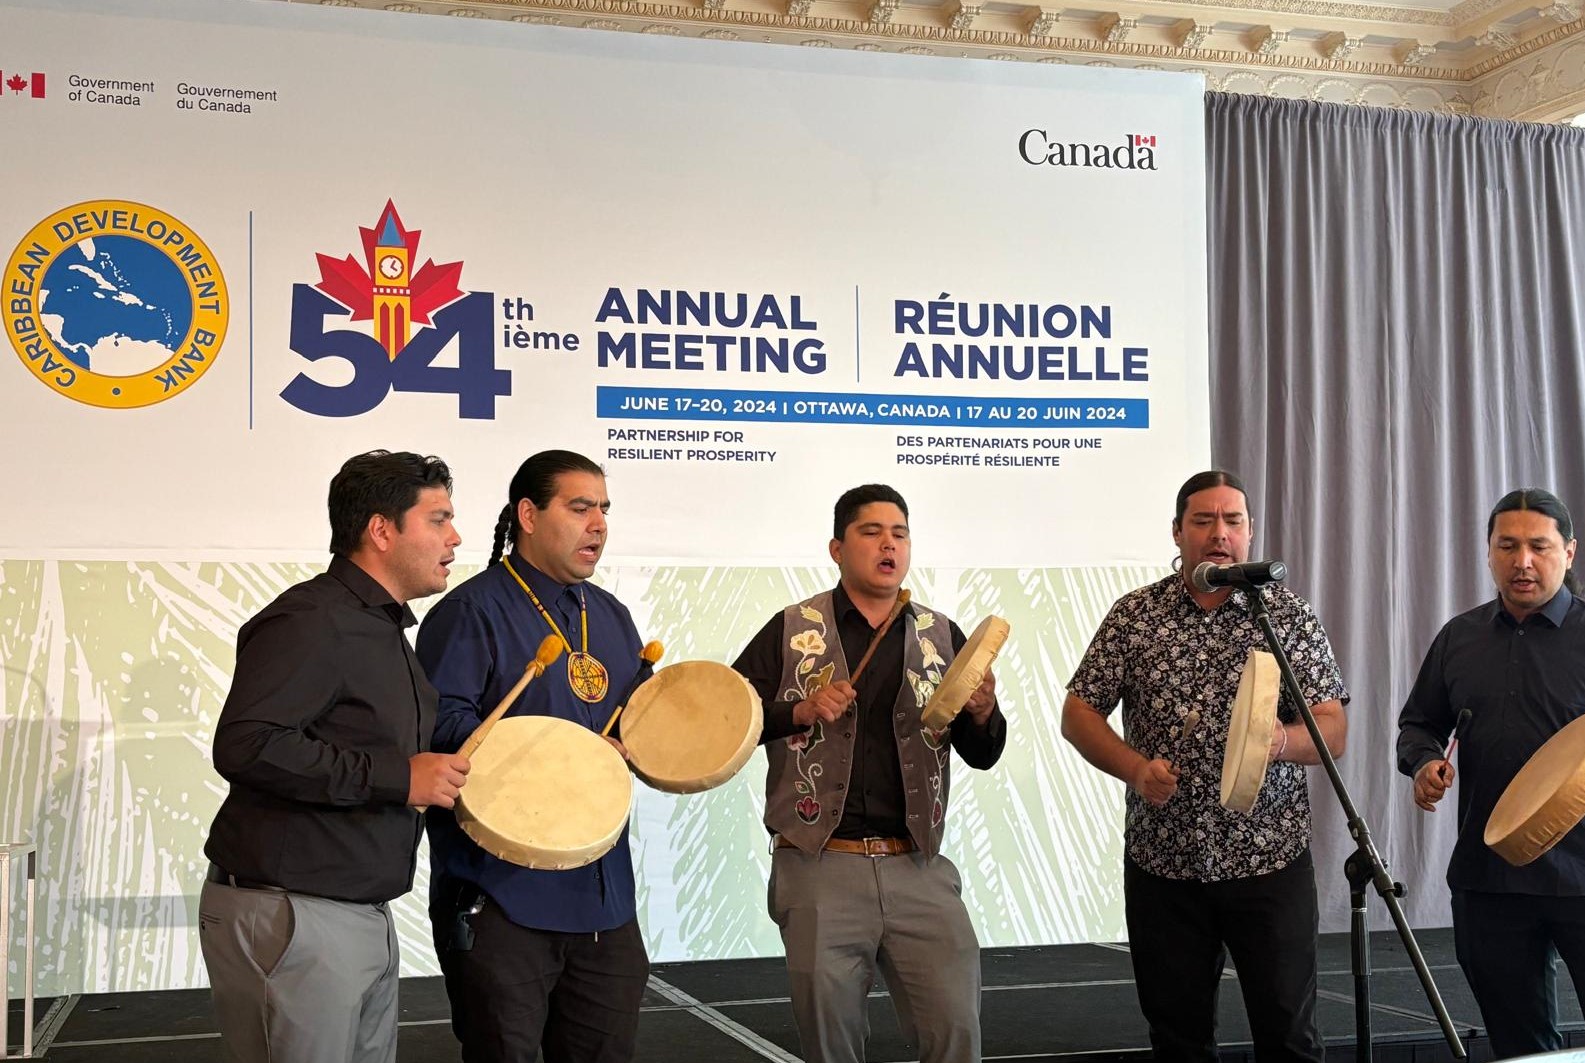 Members of the Eagles Singers performing at the Opening Ceremony of CDB's Annual Meeting 